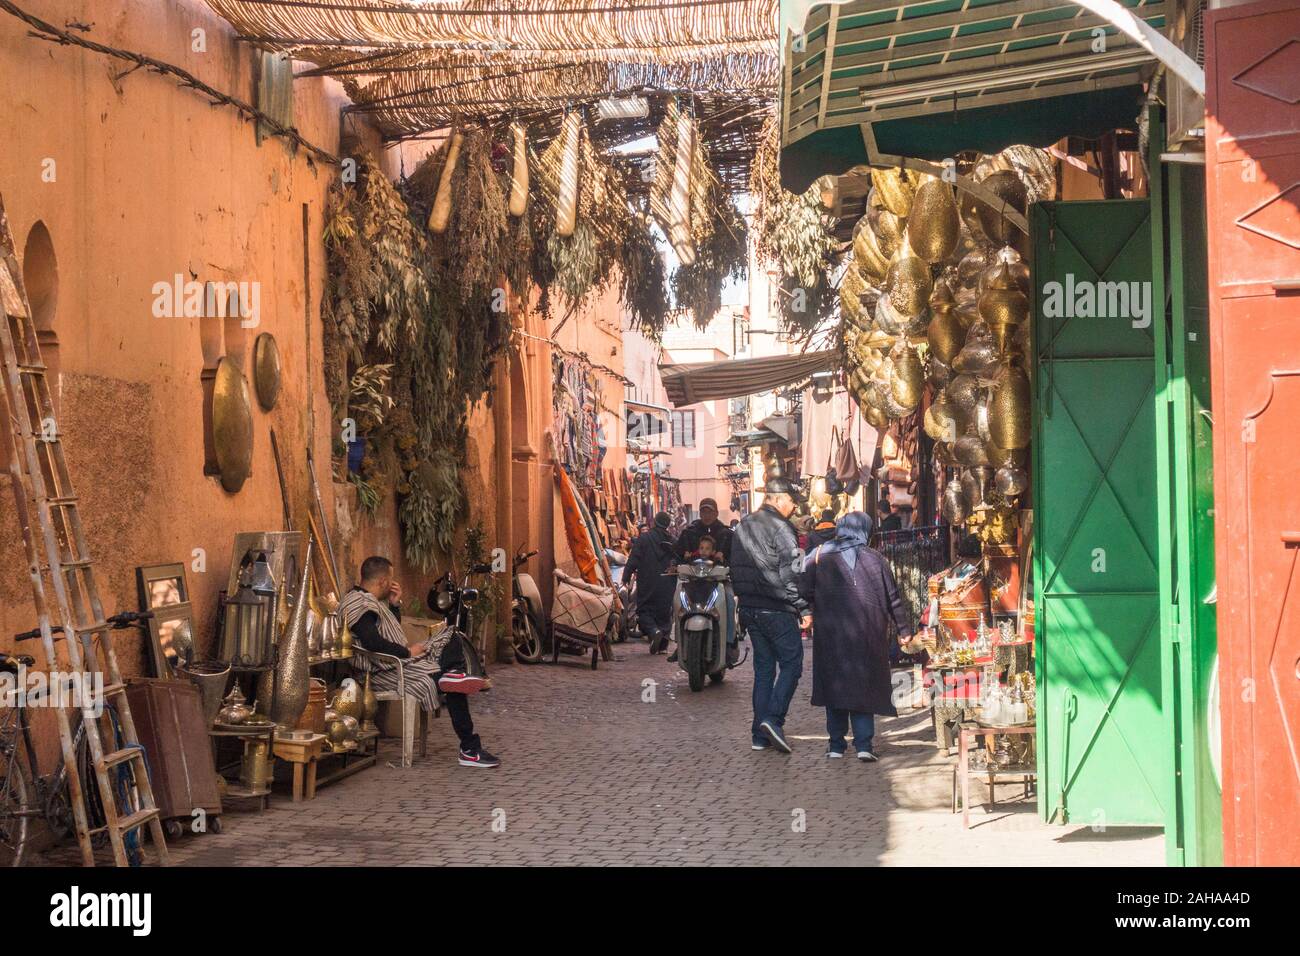 Kasbah, Marrakech,  shops displaying copper work, and herbs, Morocco, northern Africa Stock Photo